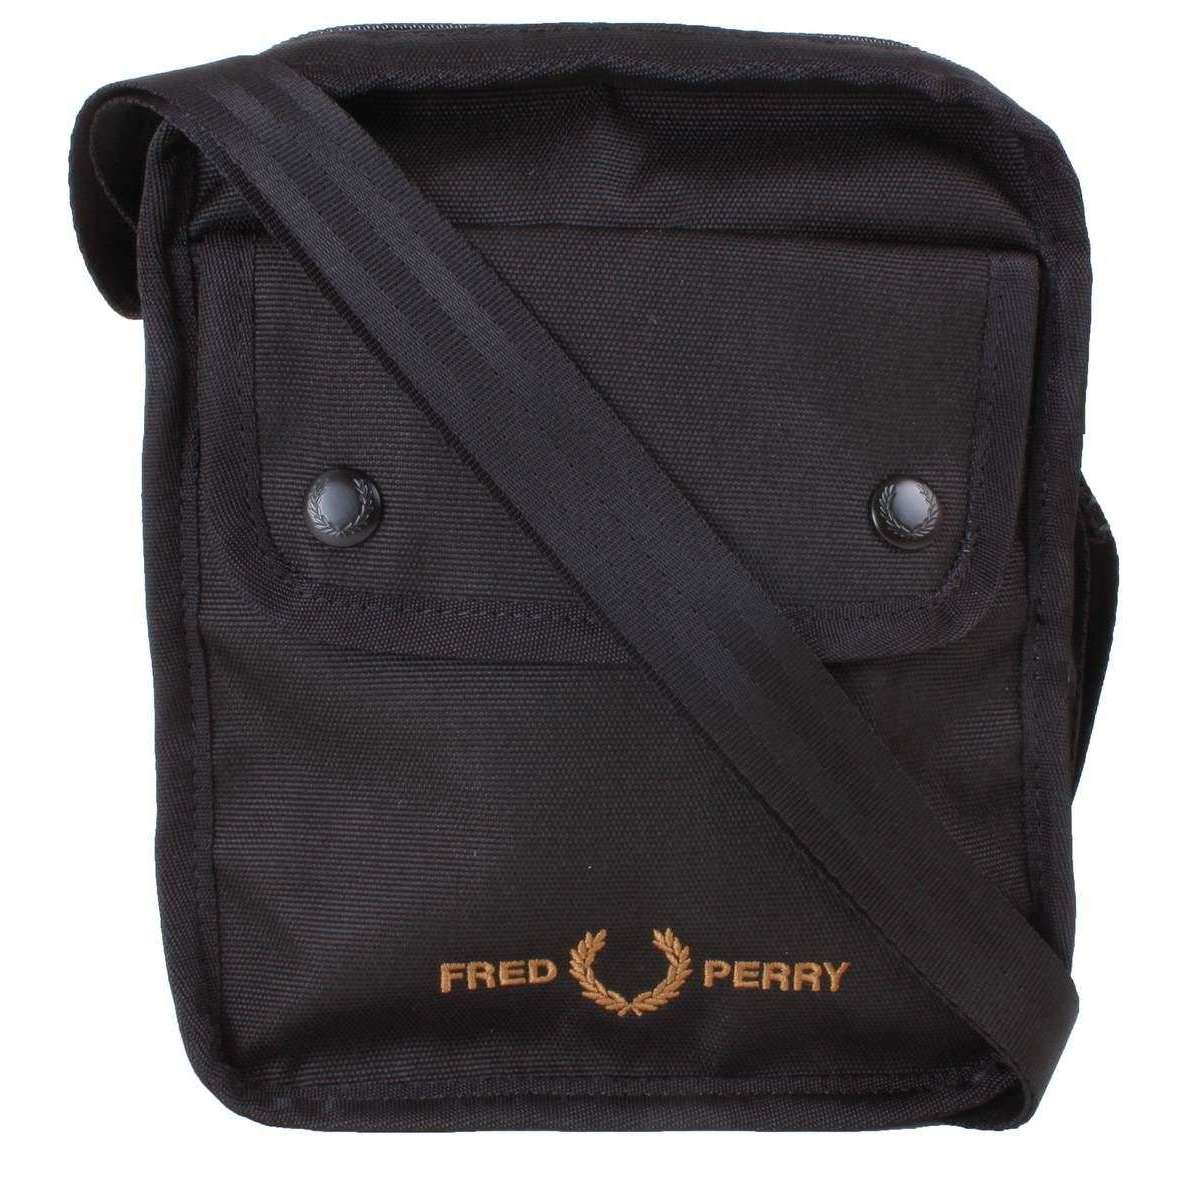 Fred Perry Branded Side Bag - Black